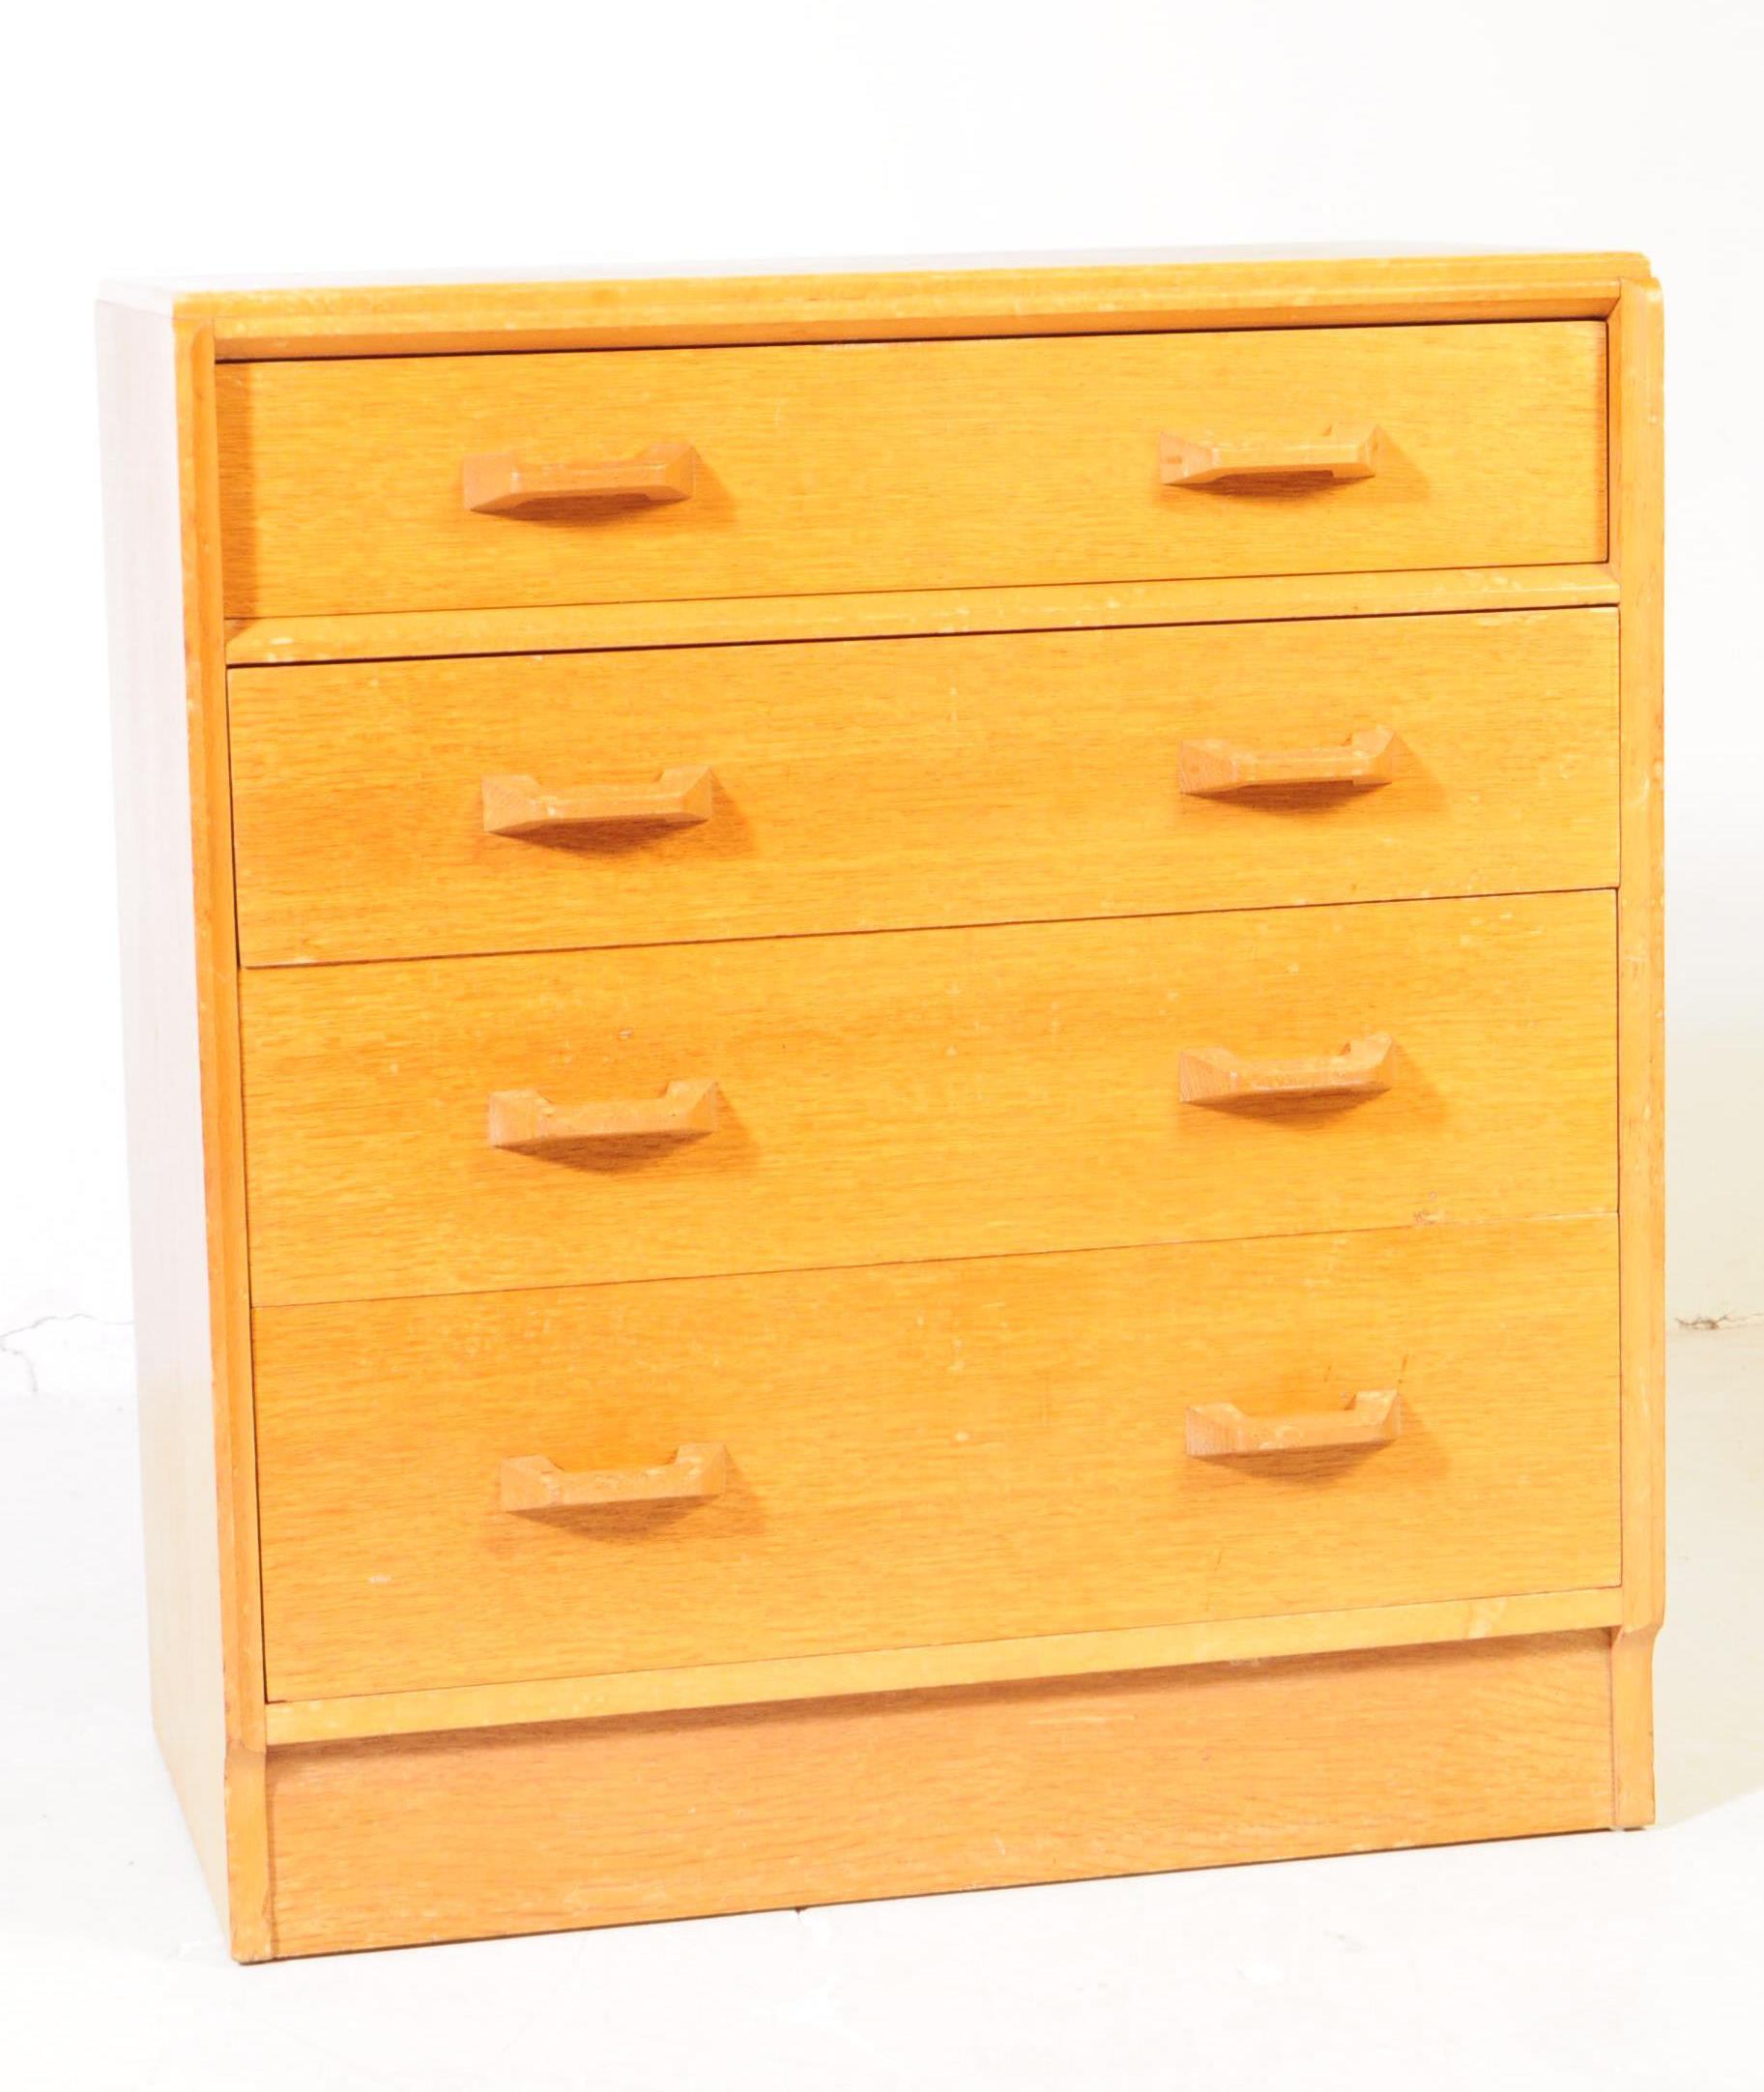 G-PLAN - E. GOMME - MID CENTURY BRANDON CHEST OF DRAWERS